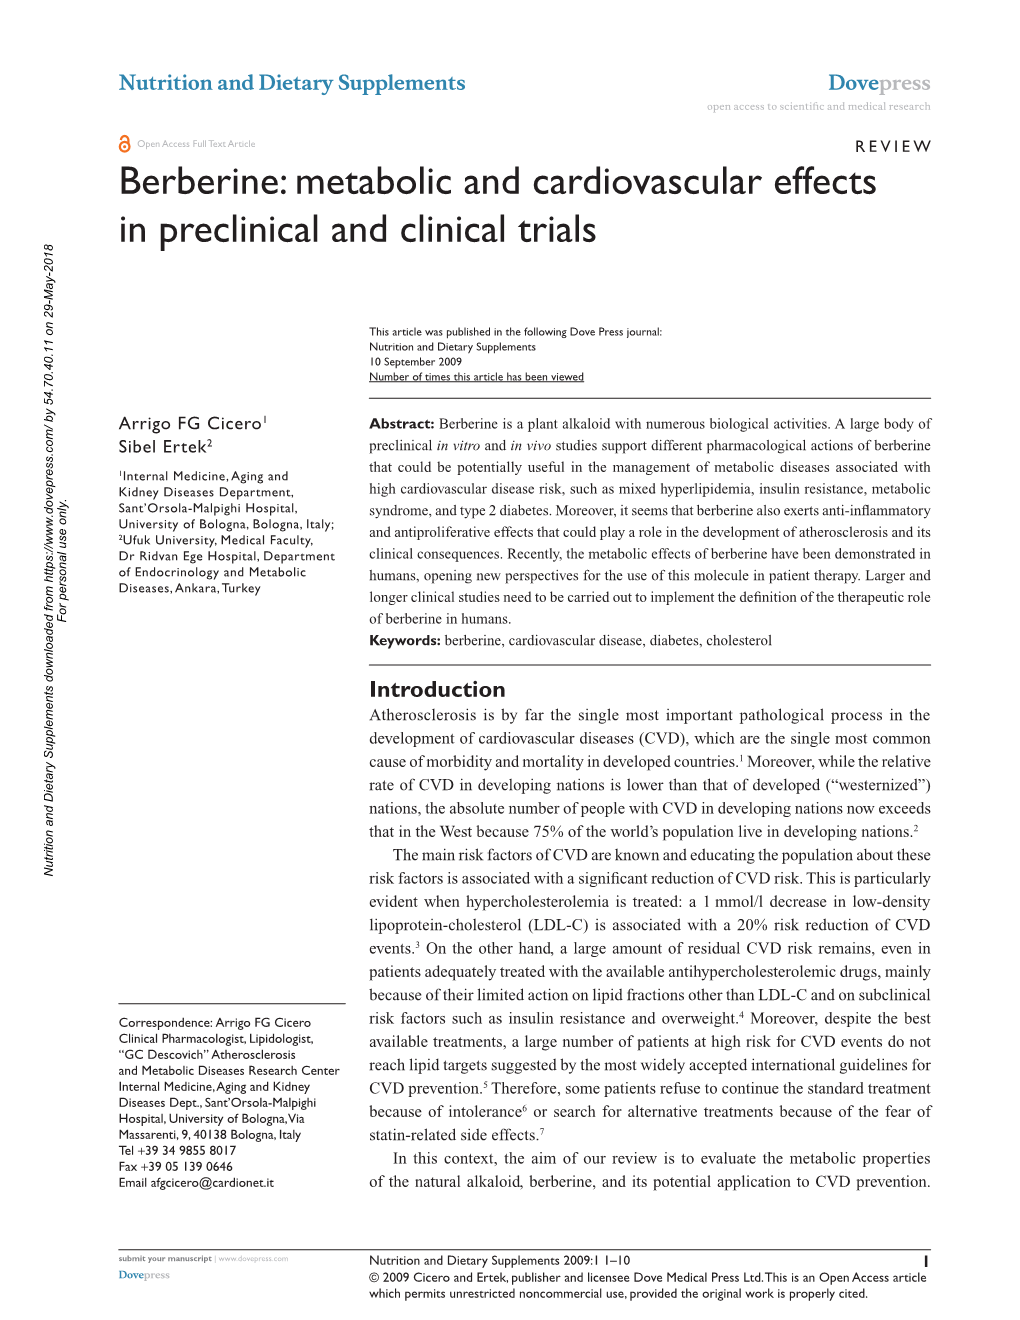 NDS-6084-Metabolic and Cardiovascular Effects of Berberine